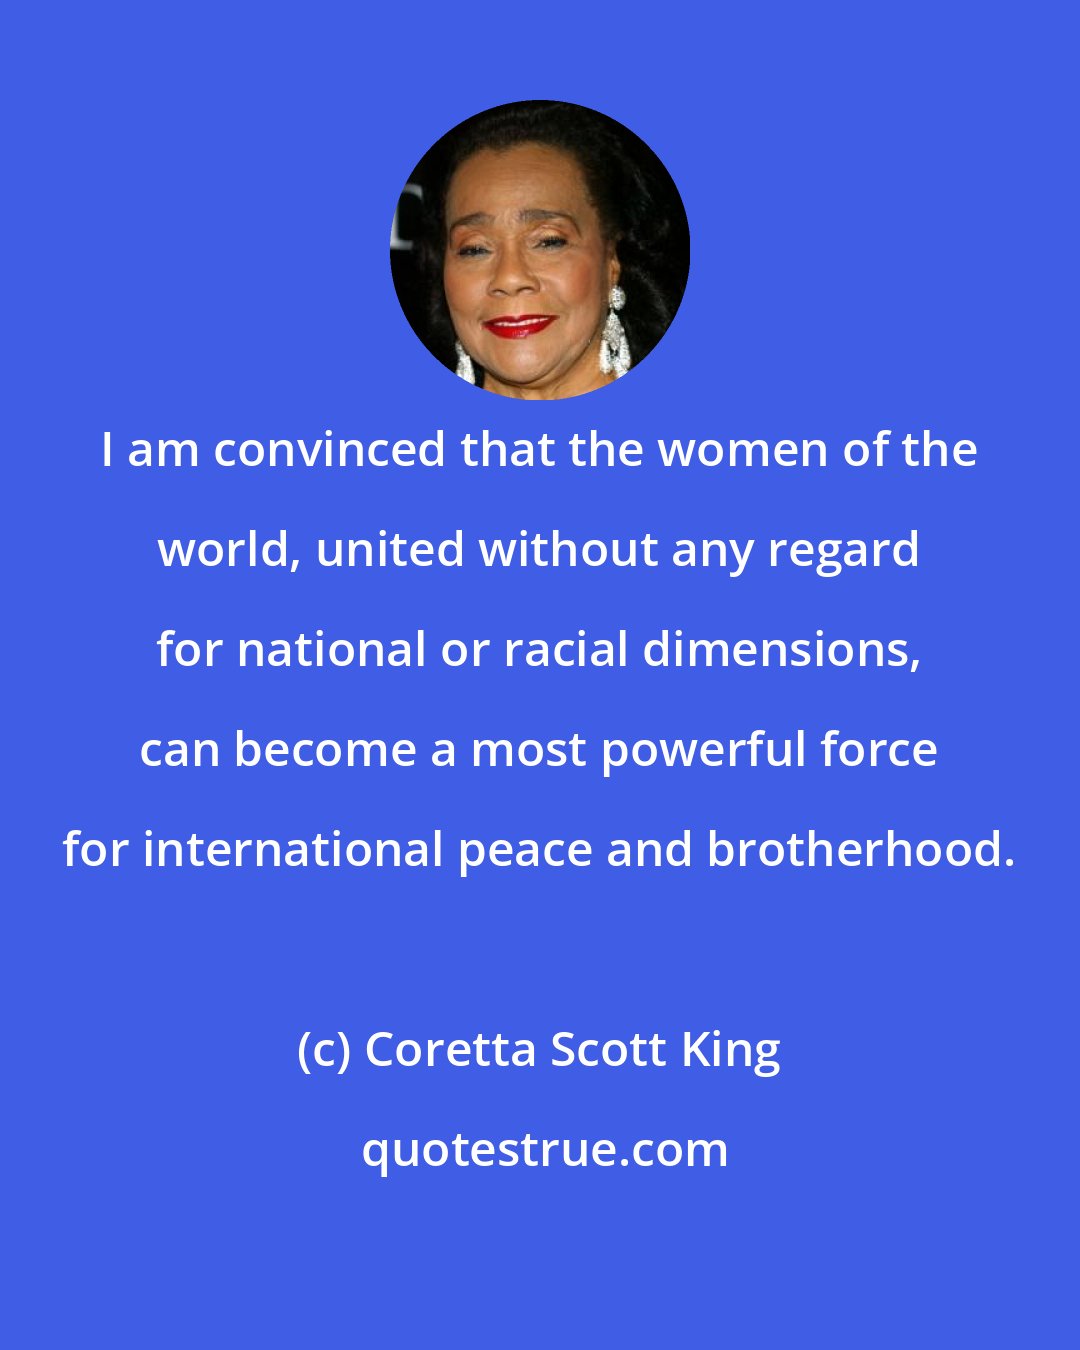 Coretta Scott King: I am convinced that the women of the world, united without any regard for national or racial dimensions, can become a most powerful force for international peace and brotherhood.